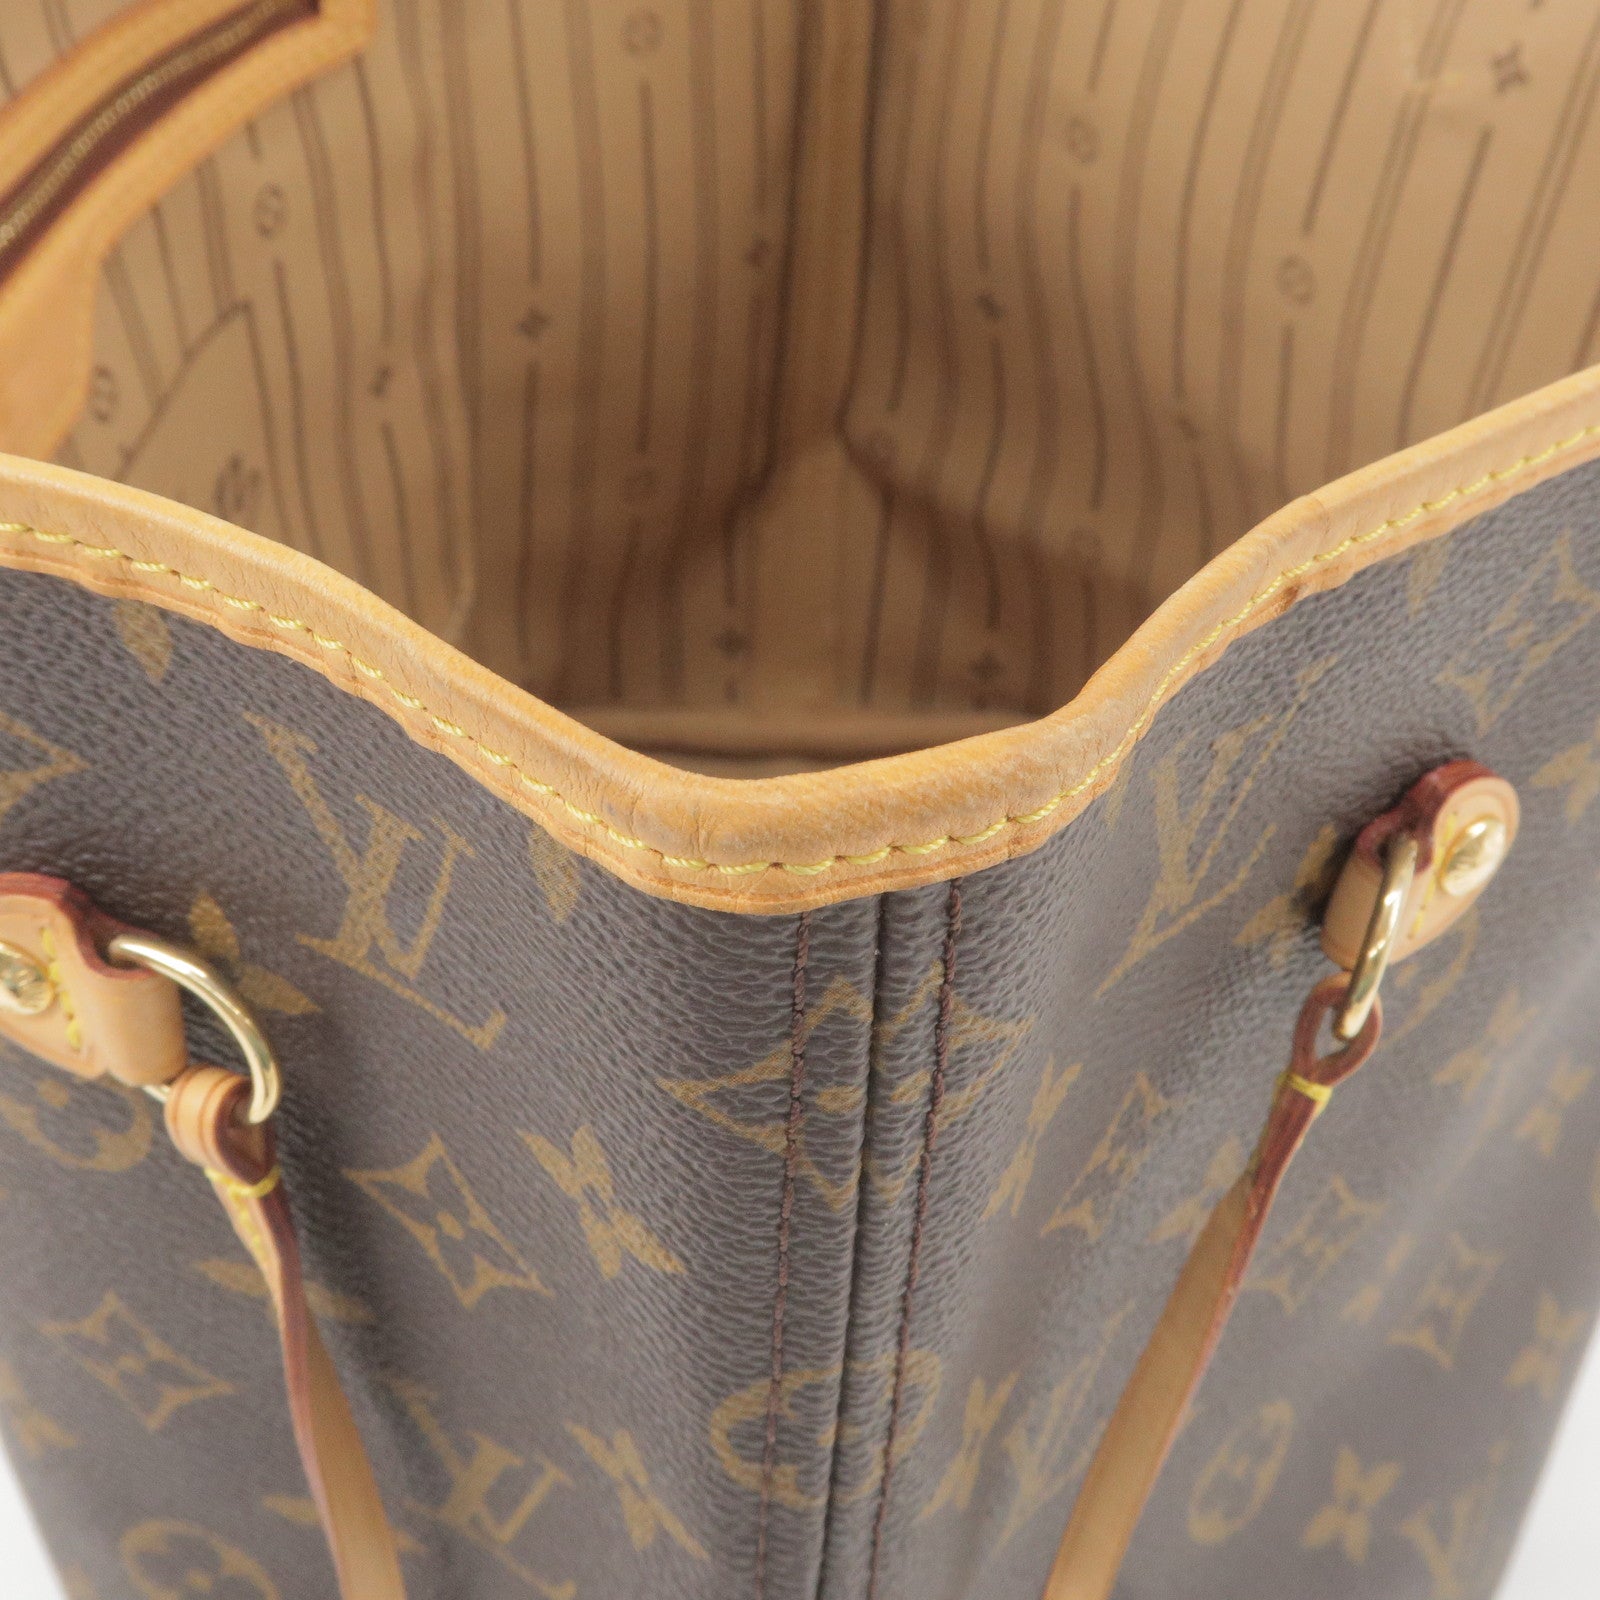 Vuitton - ep_vintage luxury Store - Over at Louis Vuitton - Monogram - Louis  - Neverfull - Bag - Brown - MM - M40156 – dct - Tote